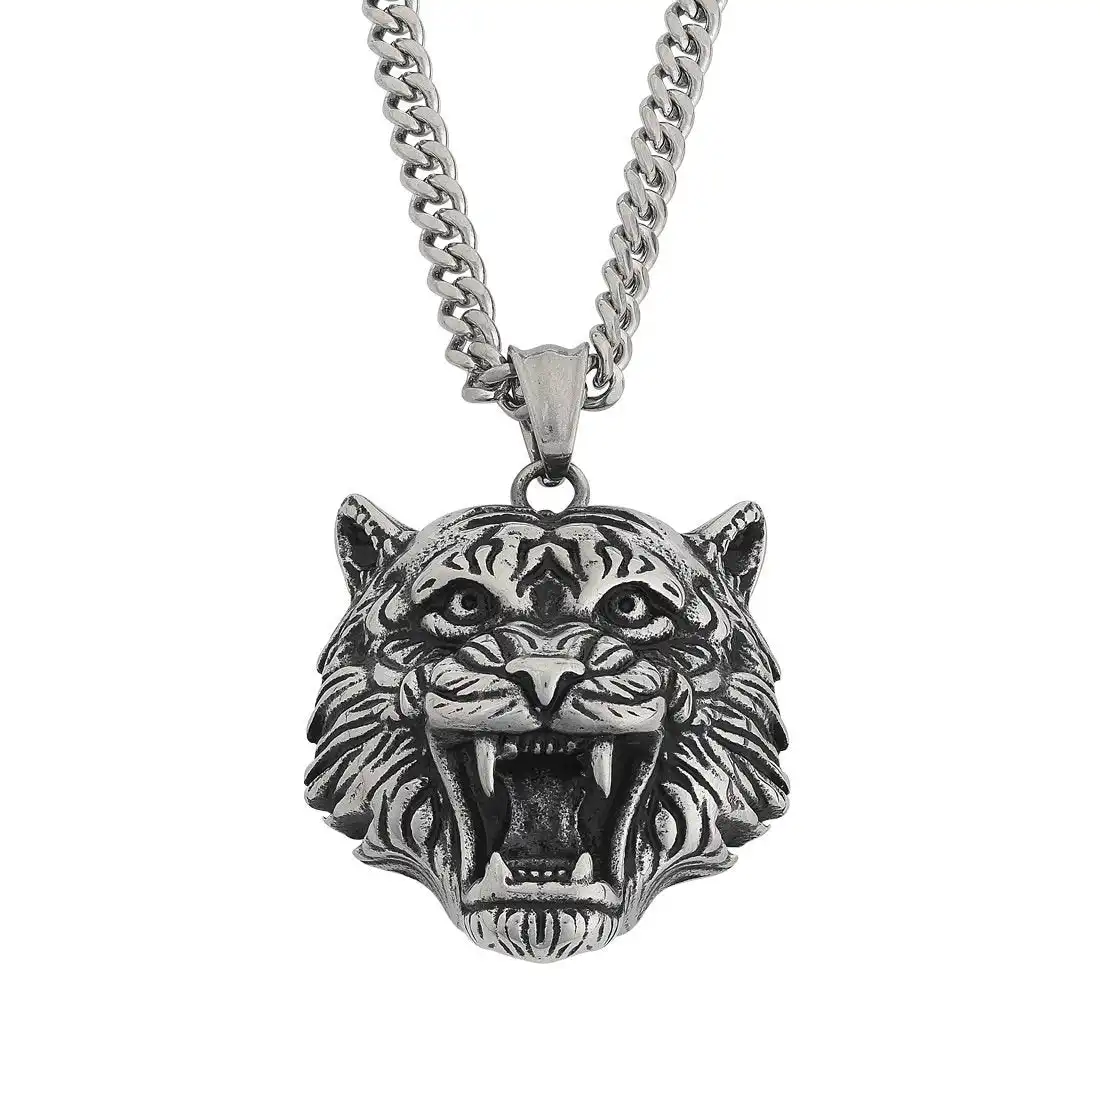 60cm Stainless Steel Men's Tiger Necklace